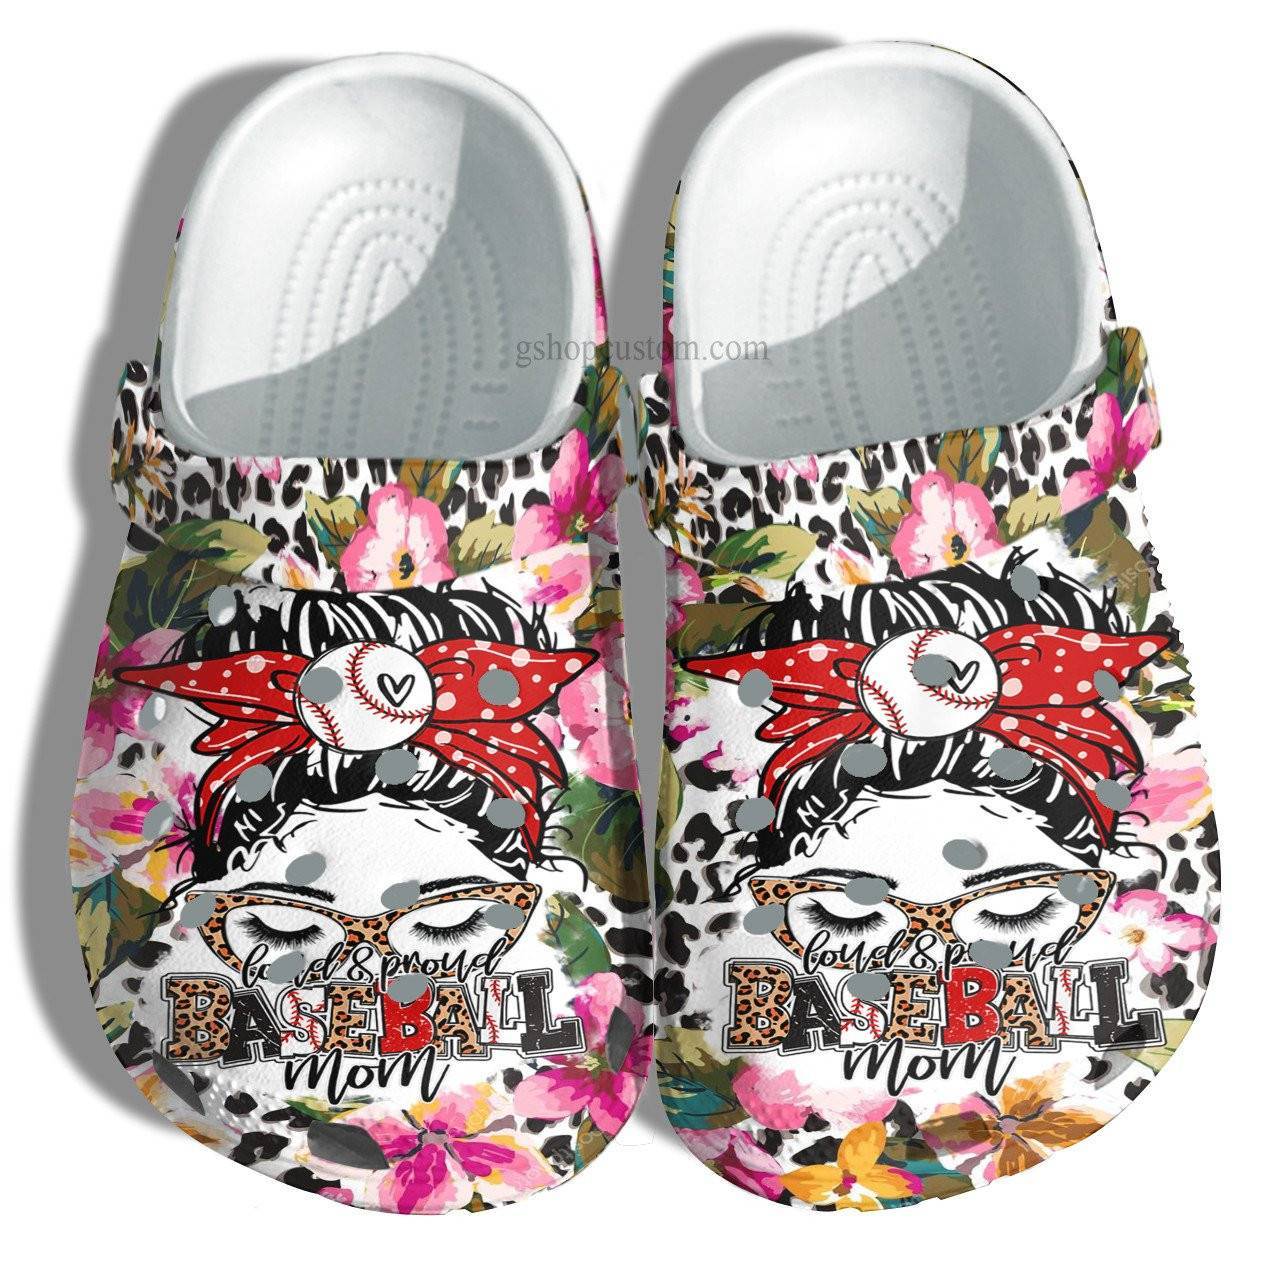 Baseball Mom Flower Cow Crocss Shoes For Wife Mom Grandma – Baseball Mom Cow Shoes Croc Clogs